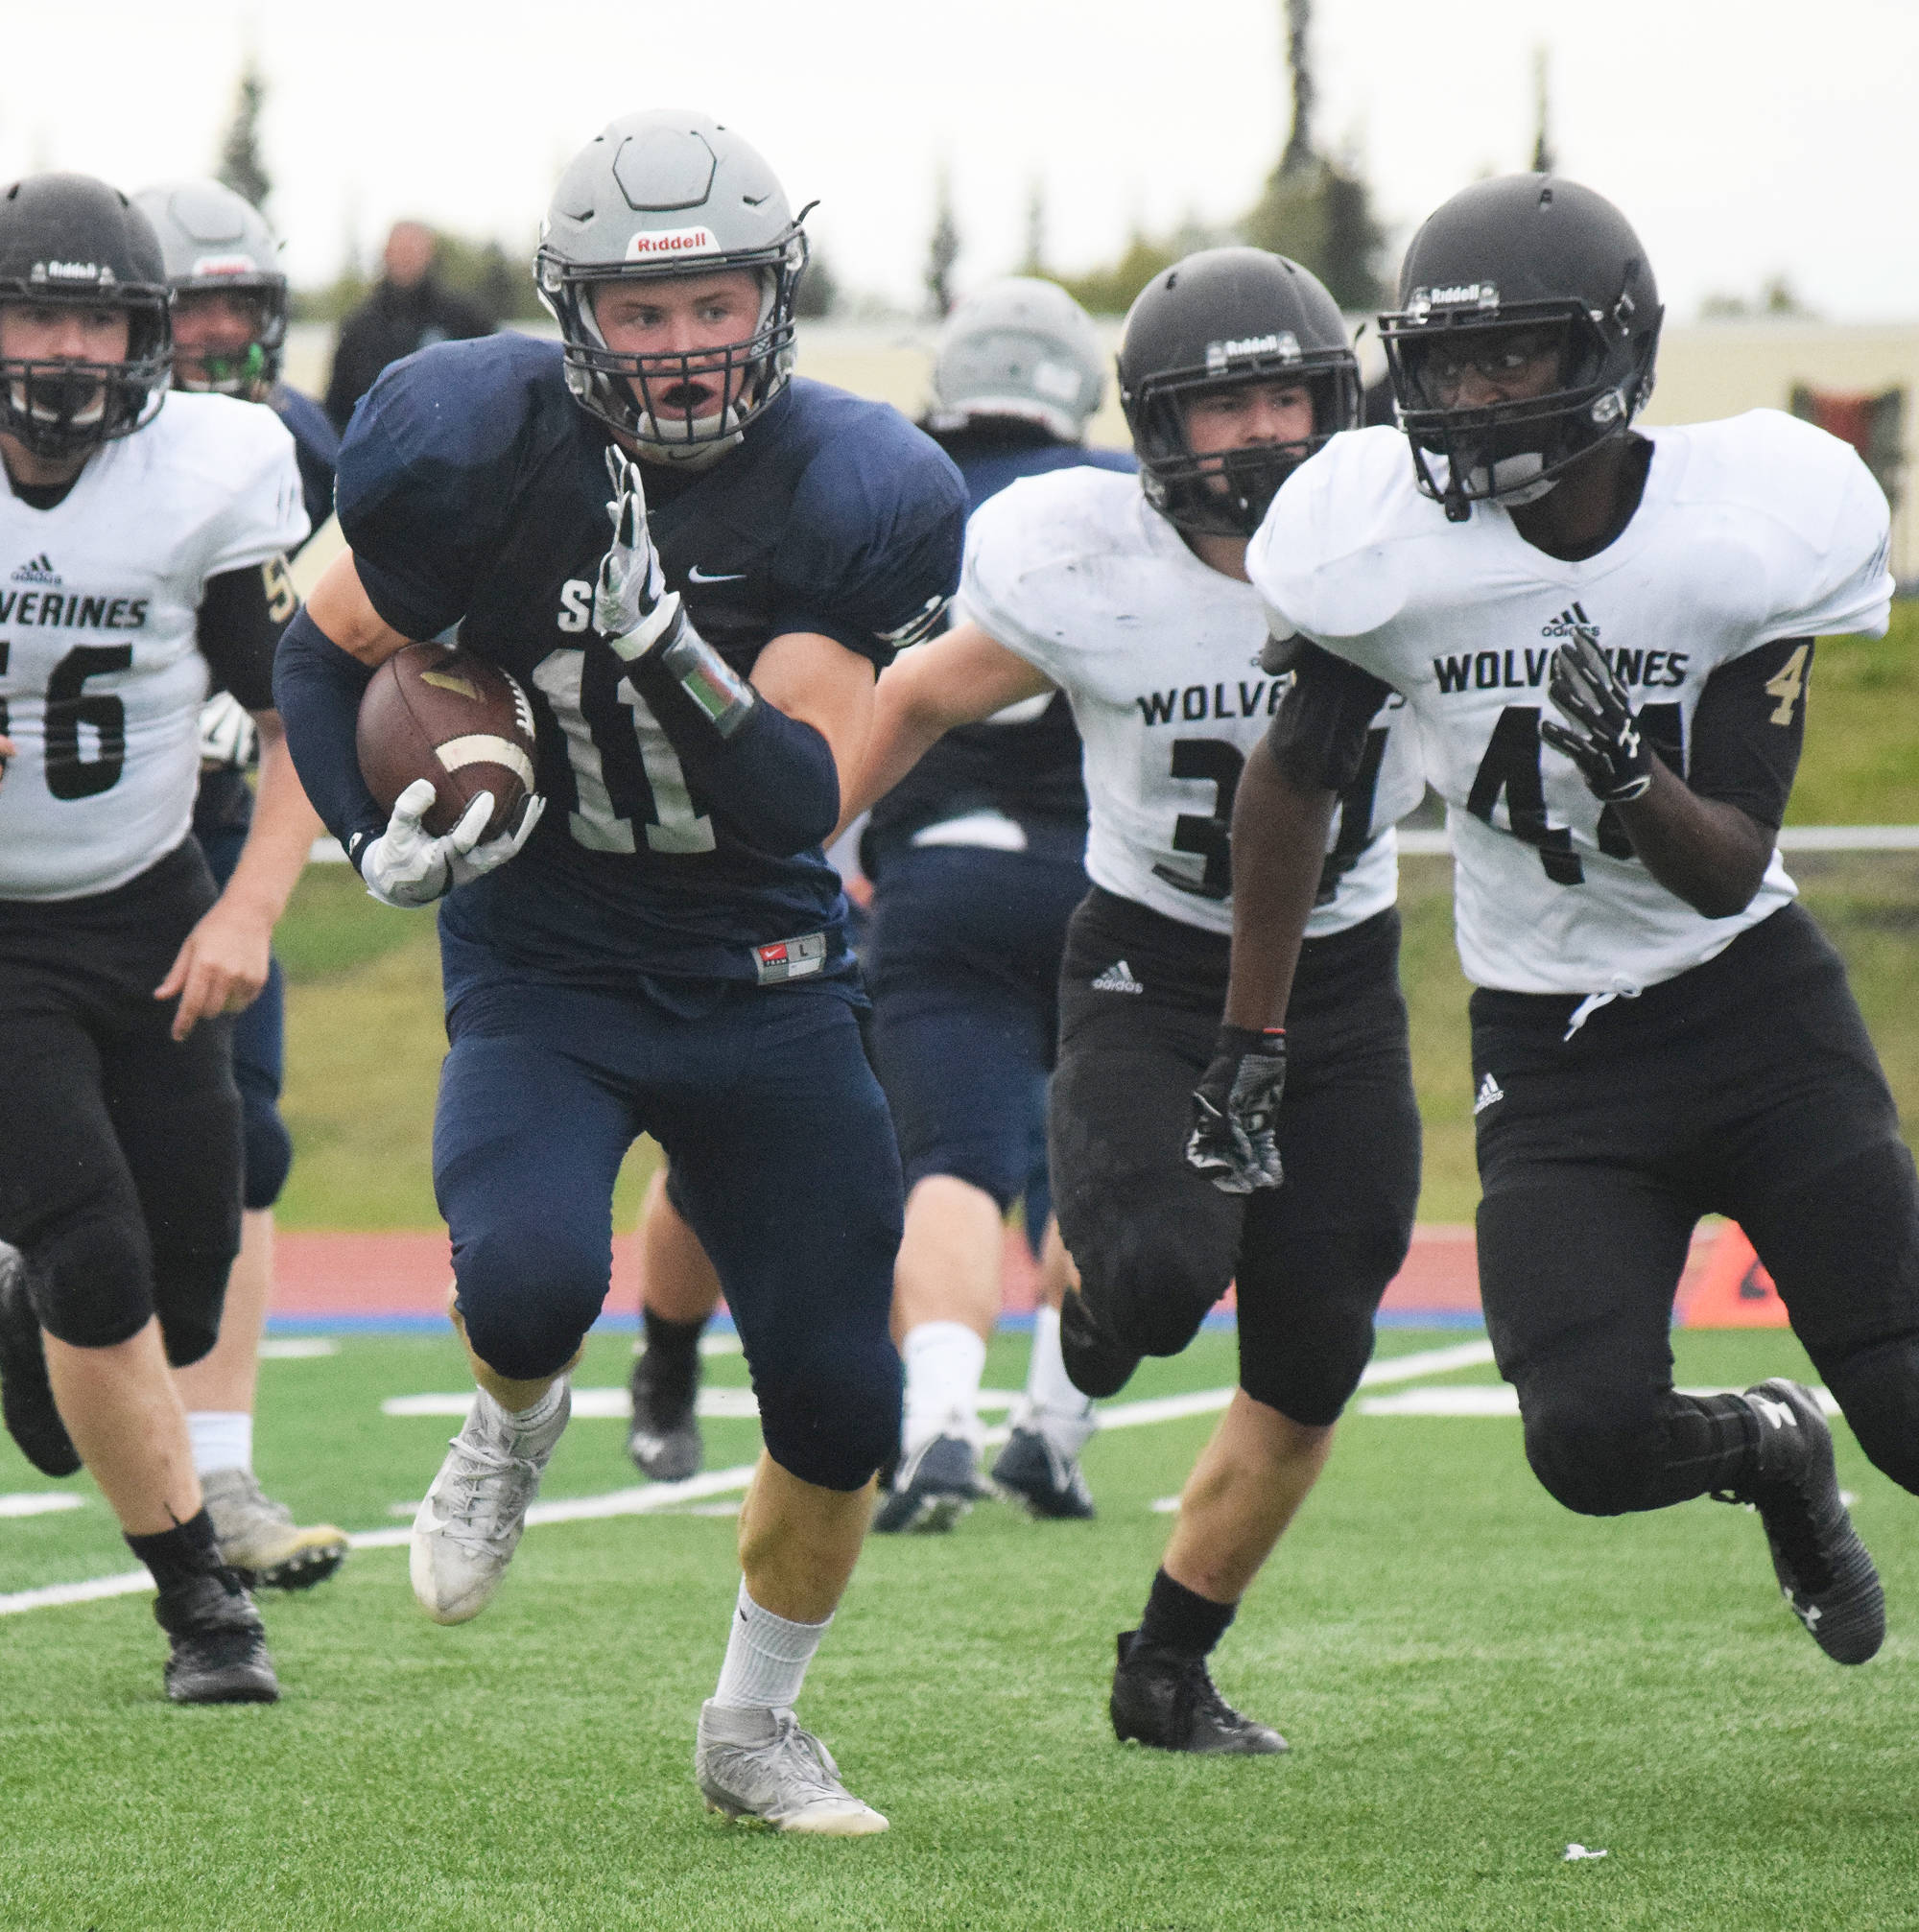 Soldotna running back Brenner Furlong evades a bevy of South Anchorage defenders Friday night at Justin Maile Field in Soldotna. (Photo by Joey Klecka/Peninsula Clarion)